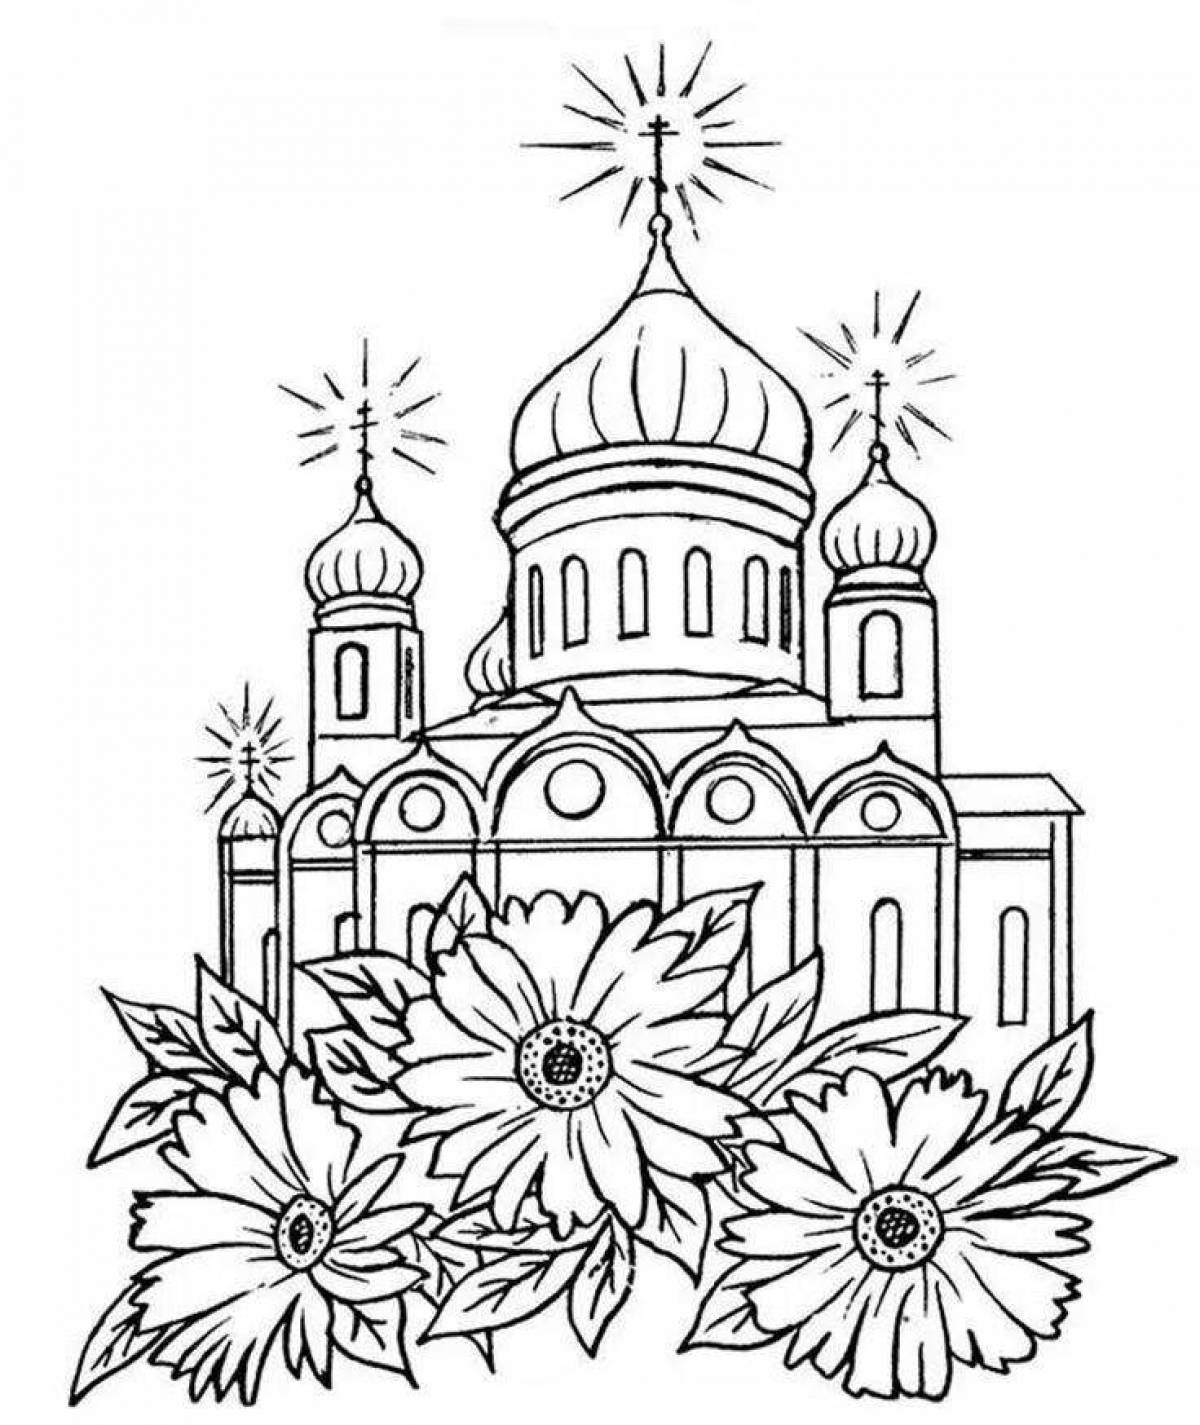 Great temple coloring book for kids